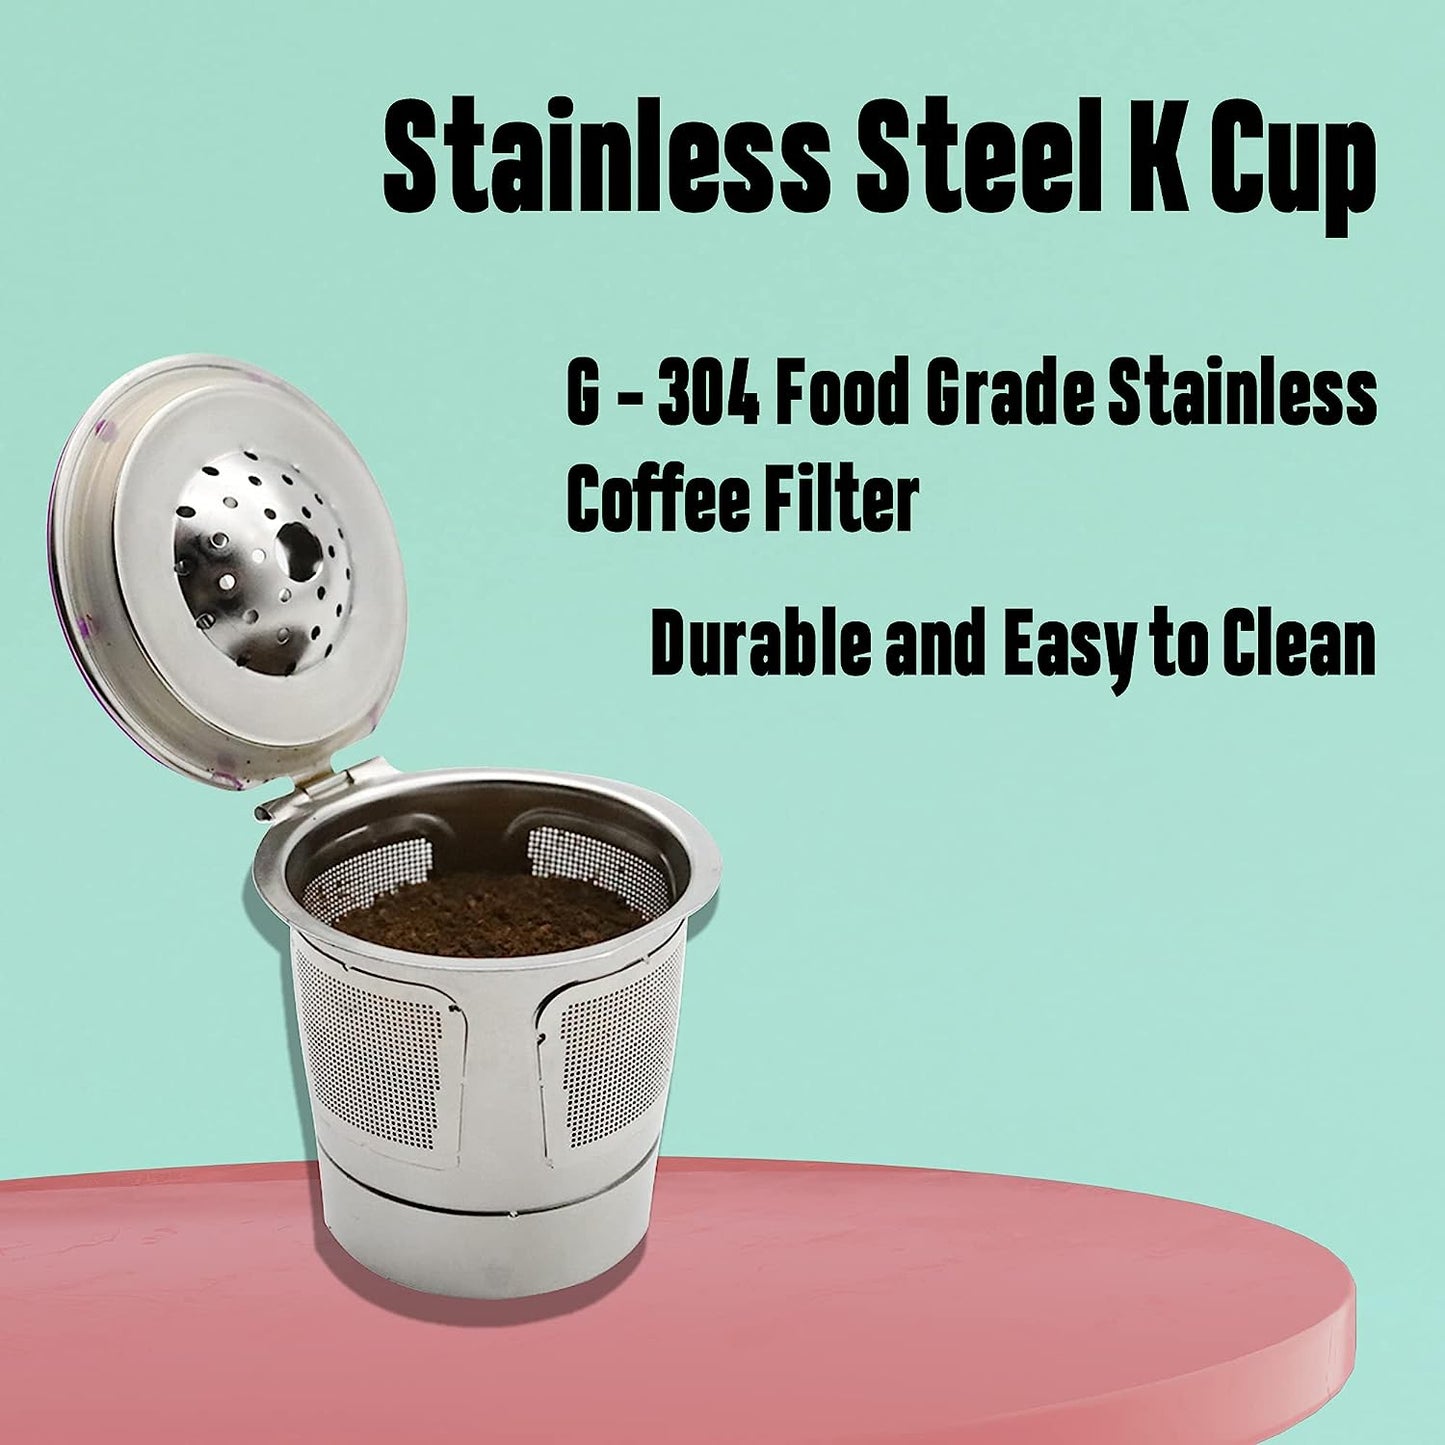 Delibru Reusable Stainless Steel K Cups for Keurig 2.0 and 1.0 Coffee Maker | Compatible with Most Keurig Brewers | Eco-Friendly Coffee Pod Filter